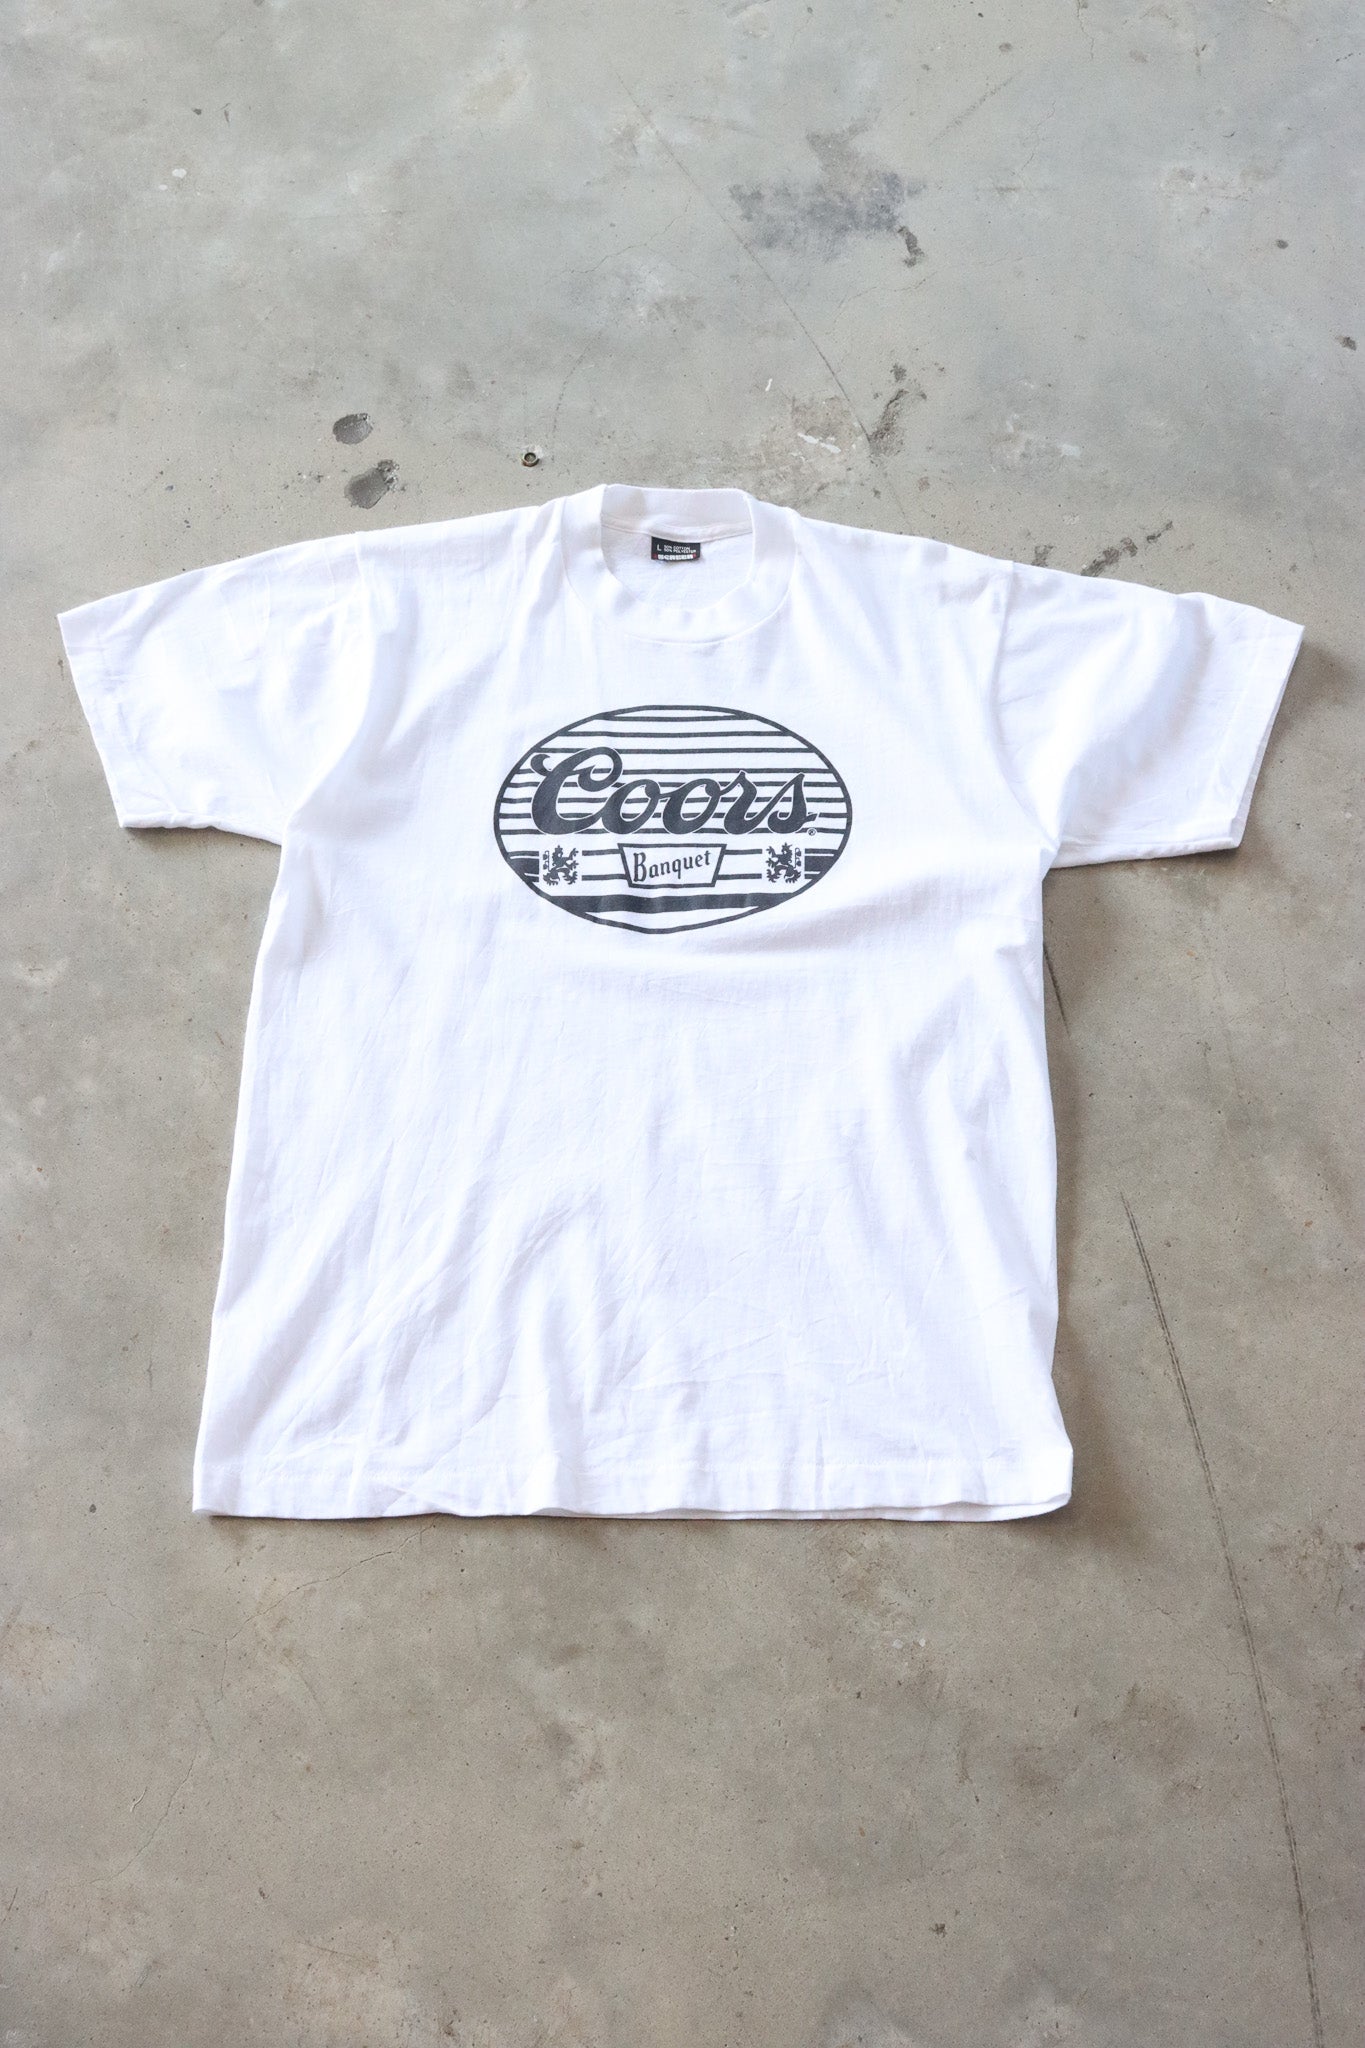 Vintage Coors Banquet Tee Large